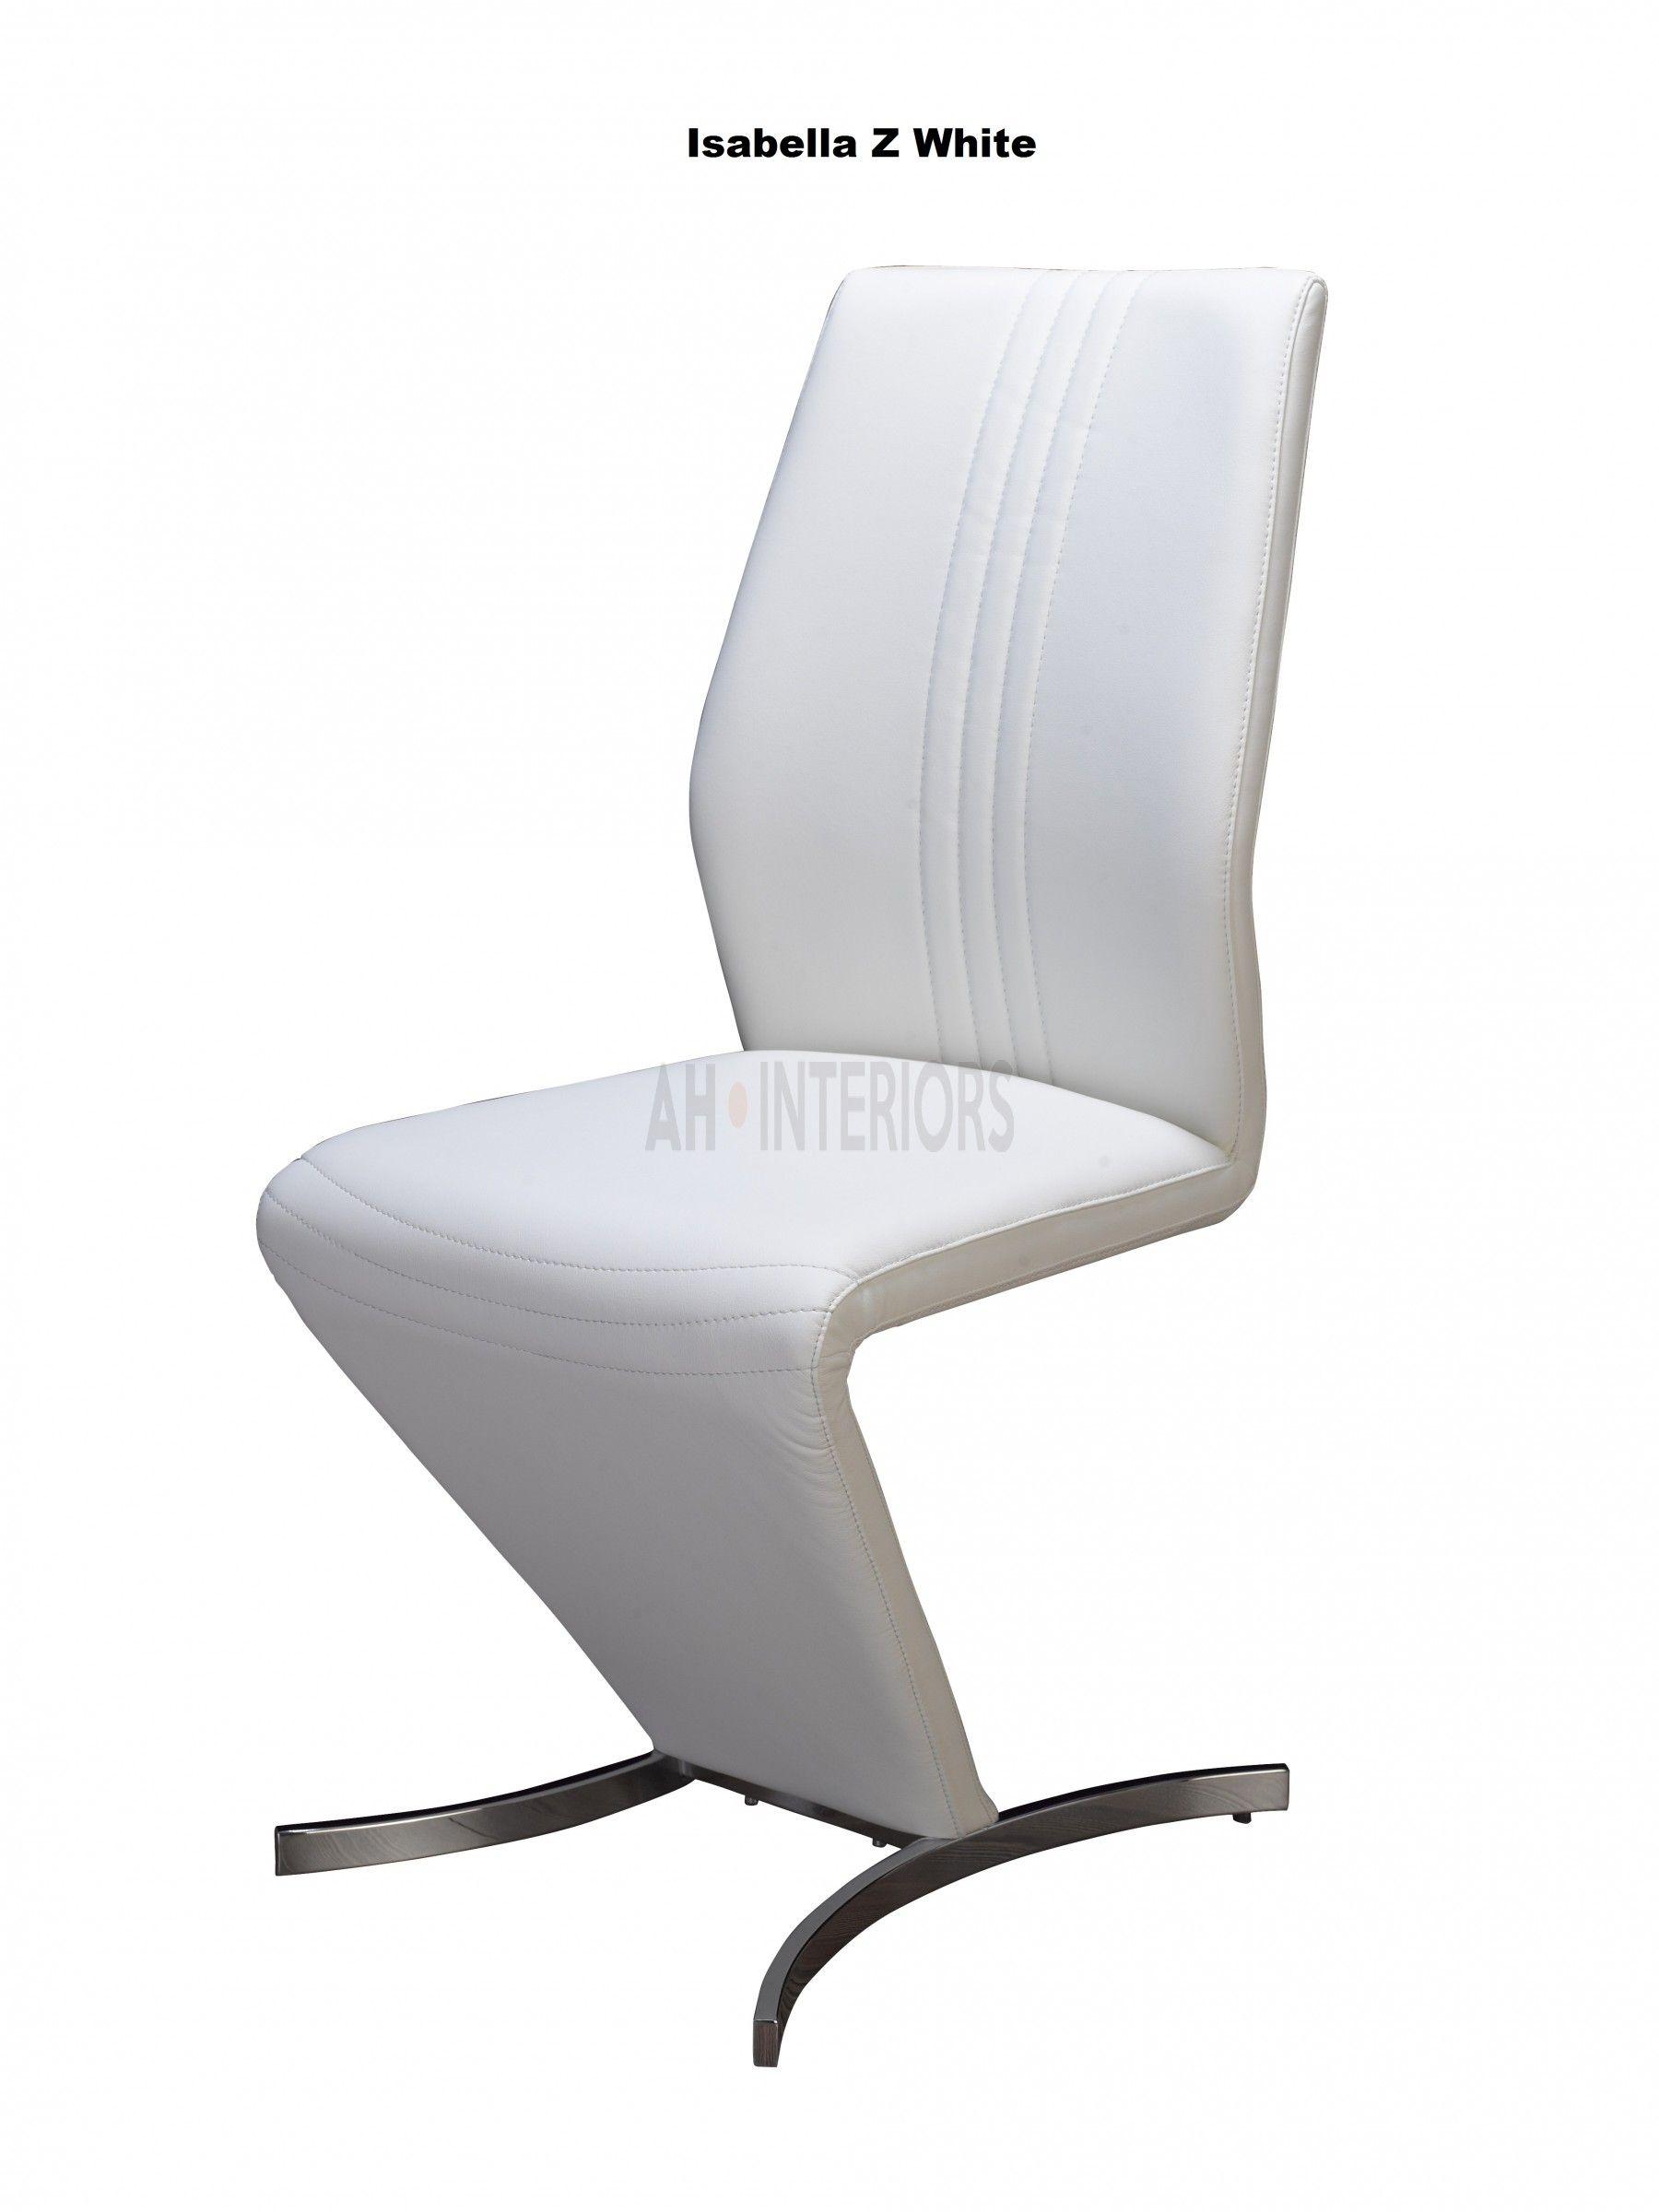 Black and White Z Logo - Isbella Z Chair White and Black Variation Dining Chair